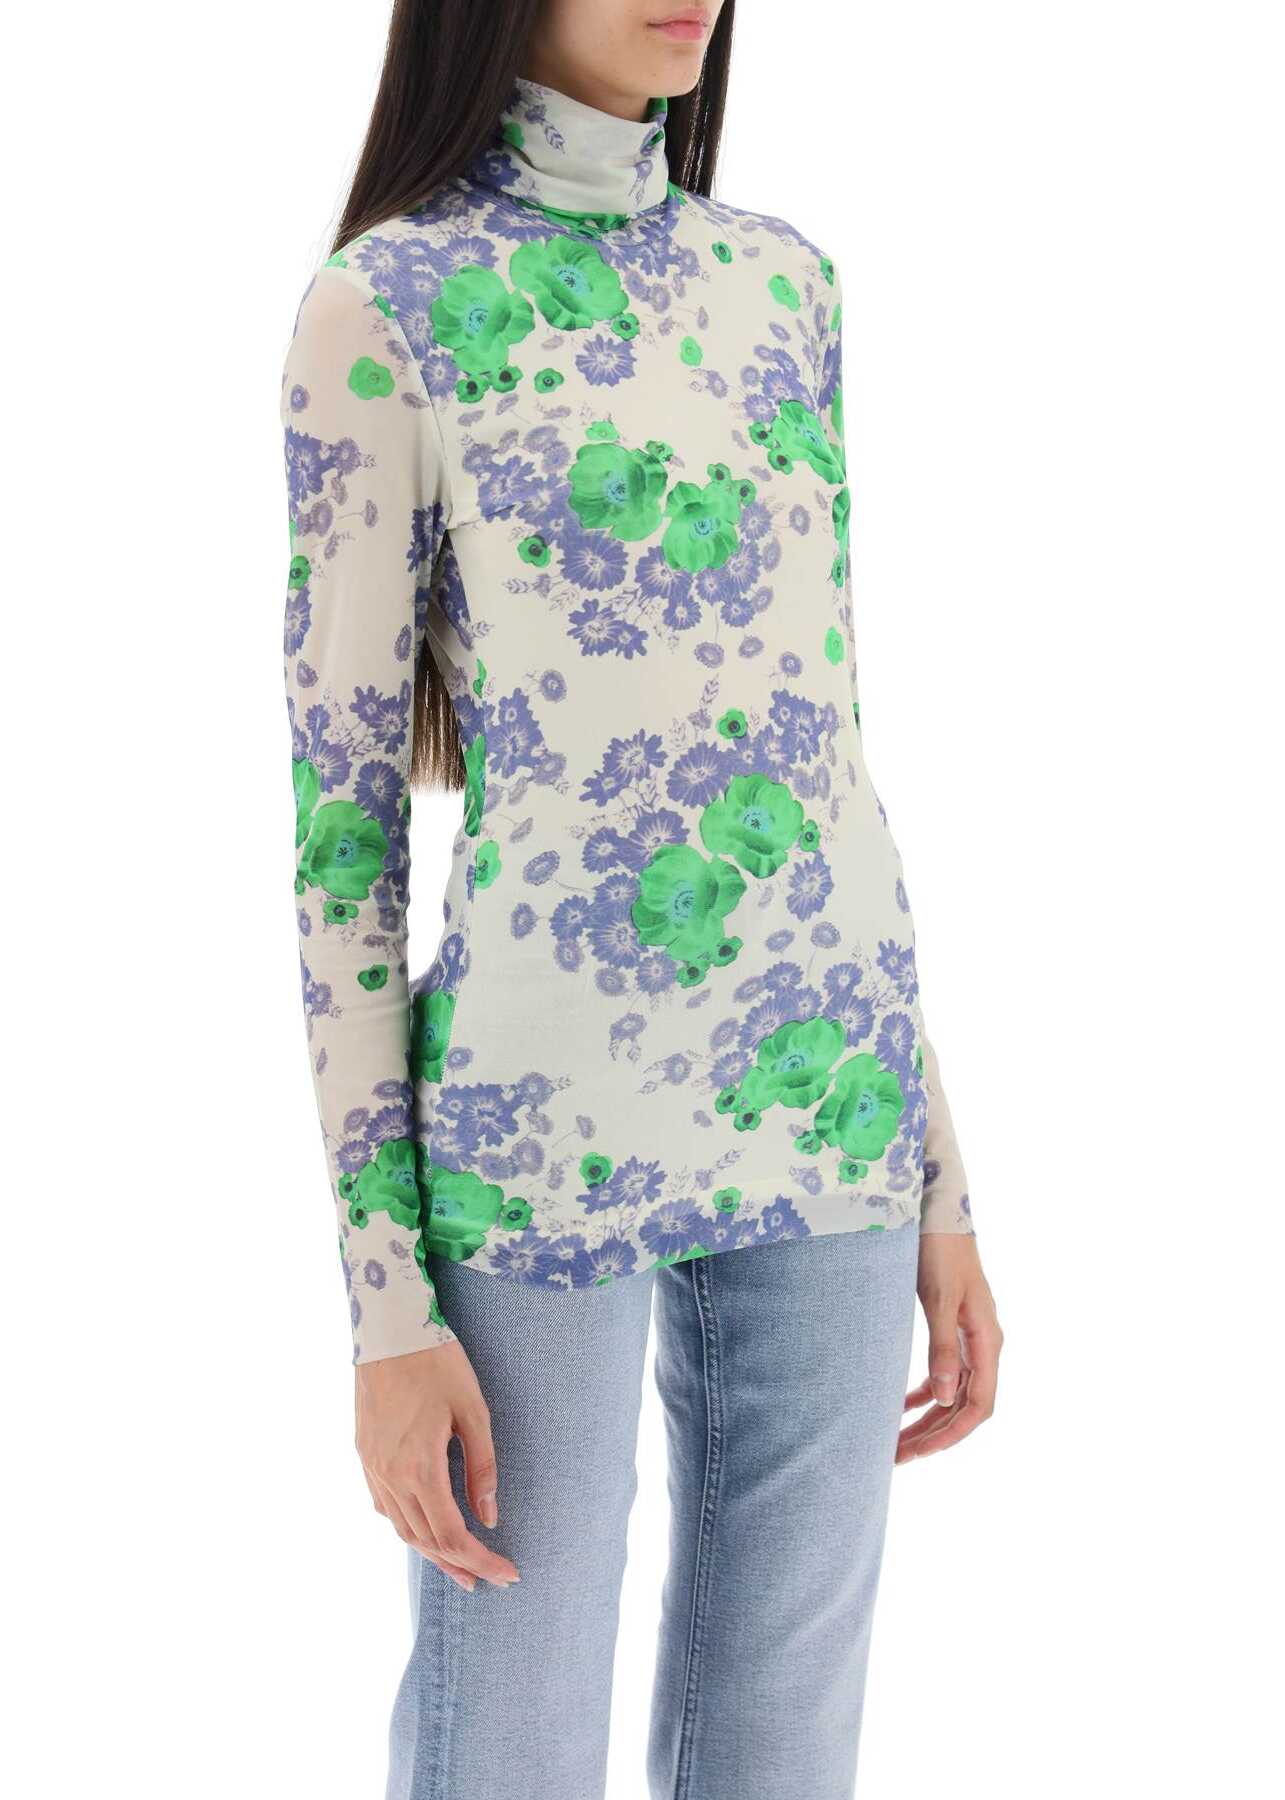 Ganni Long-Sleeved Top In Mesh With Floral Pattern EGRET image14